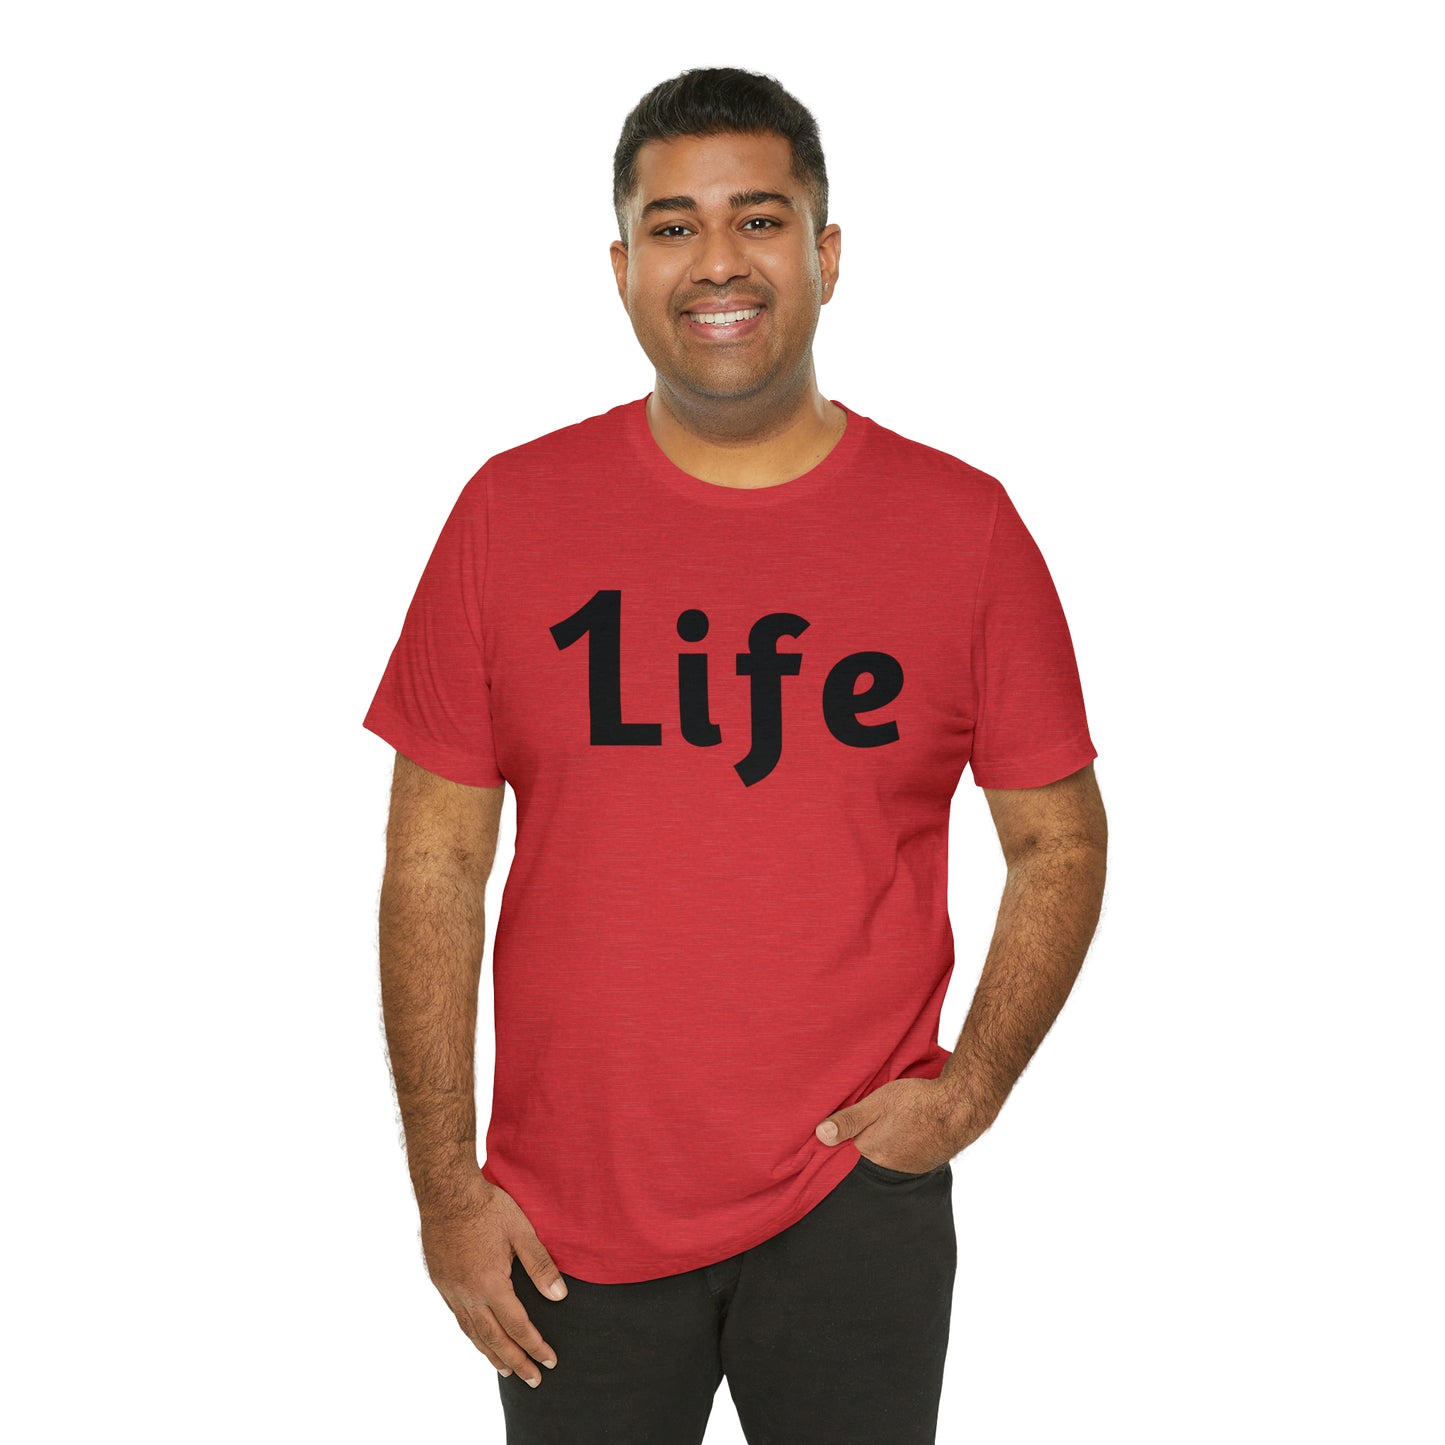 One life Shirt 1life shirt Live Your Life You Only Have One Life To Live